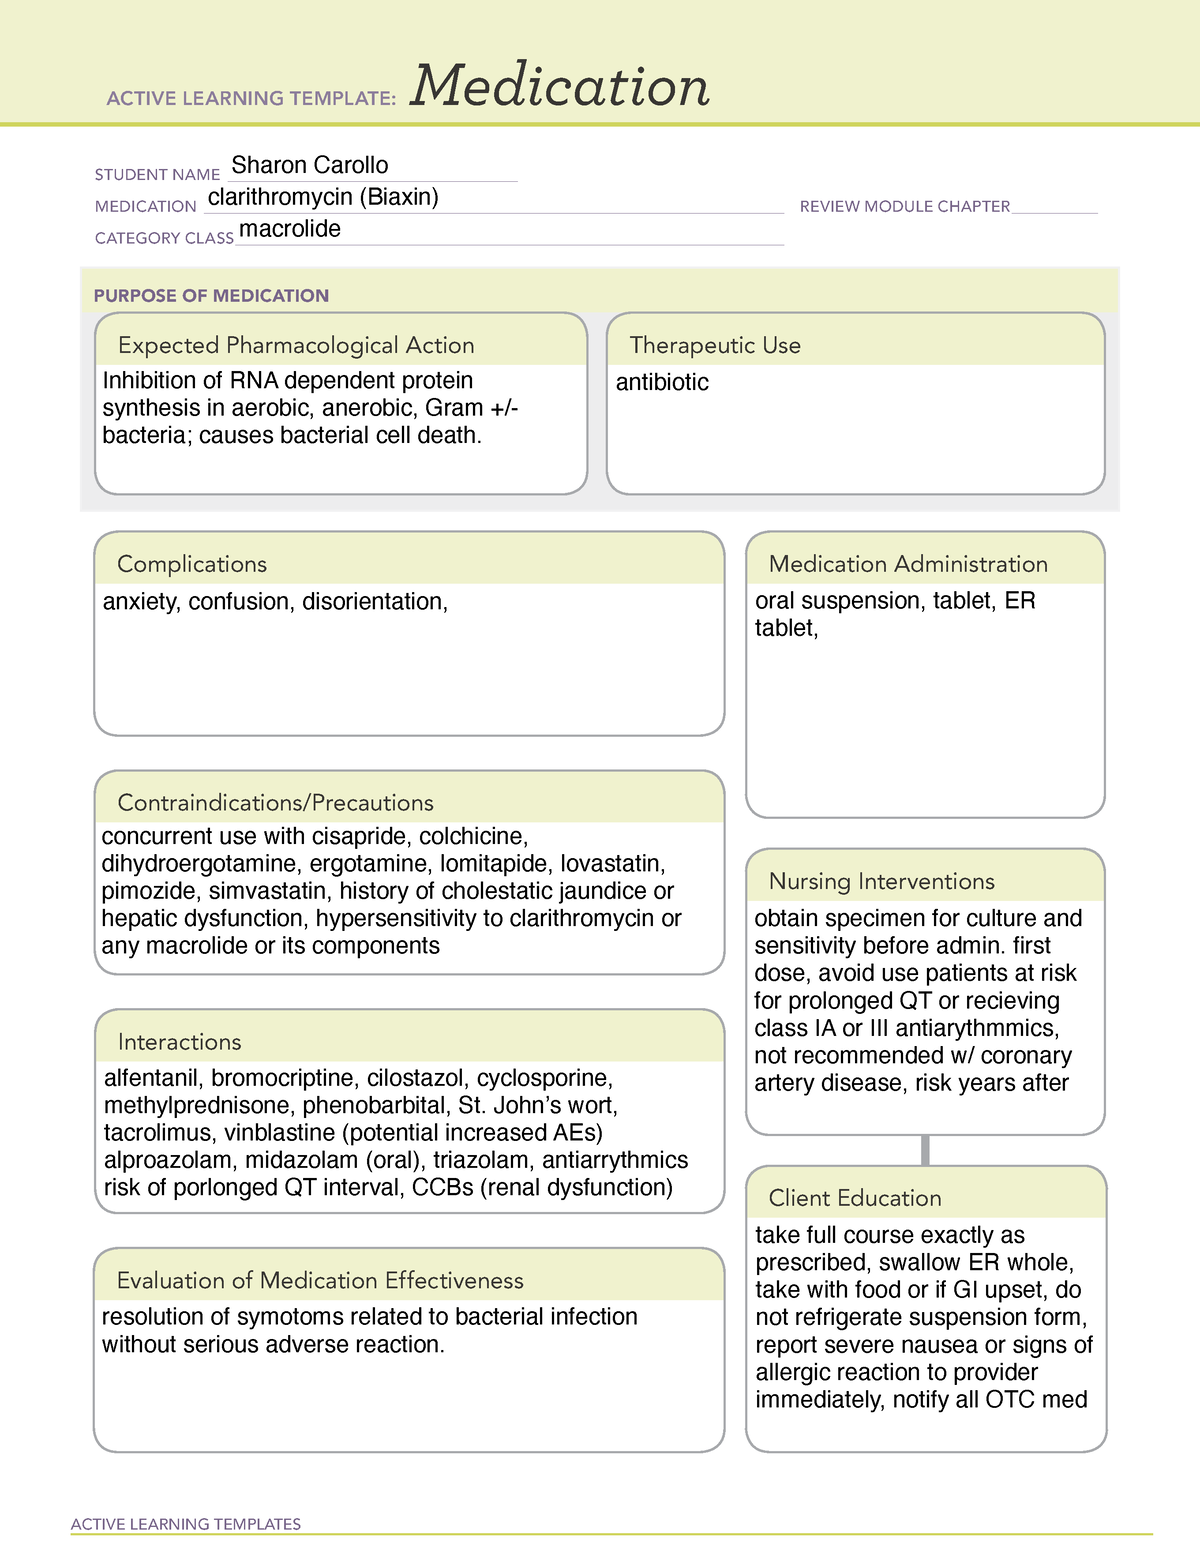 Clarithromycin ALT ACTIVE LEARNING TEMPLATES Medication STUDENT